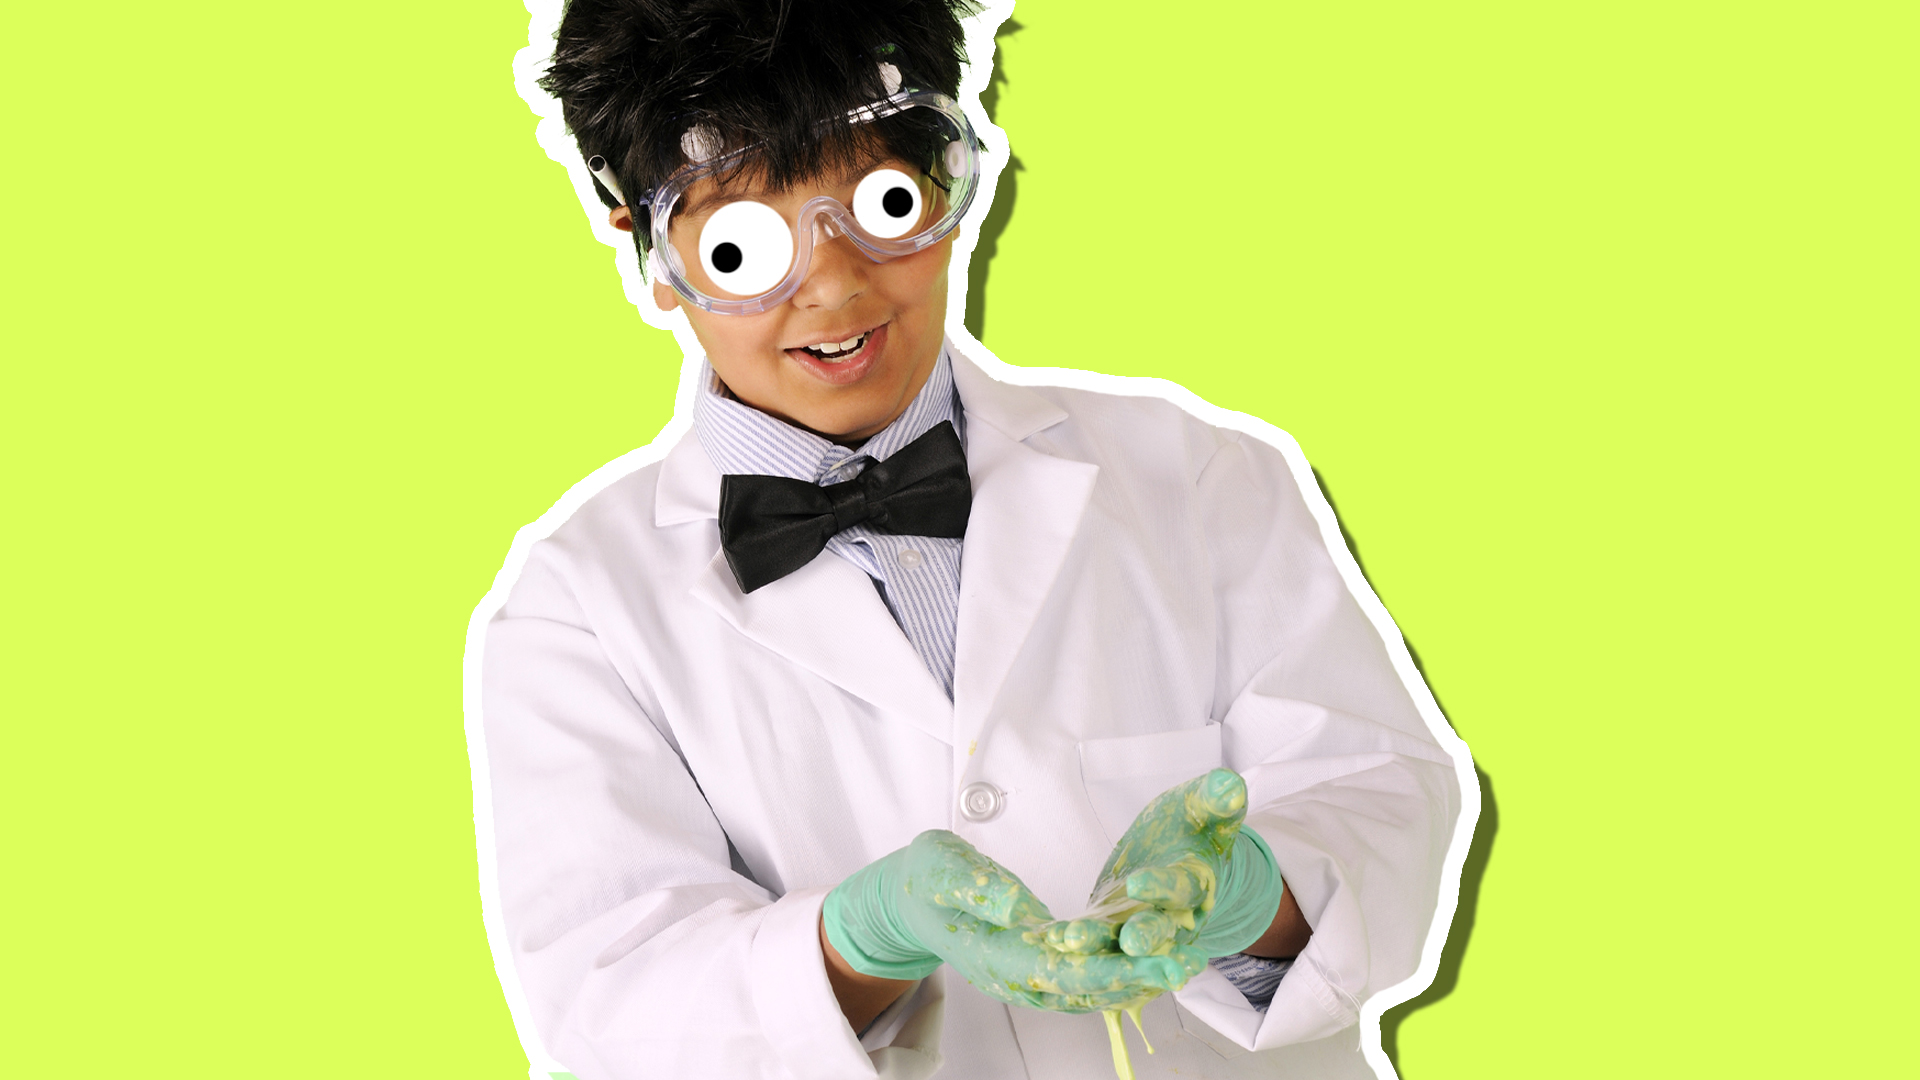 A slime scienteist – a slimetist, if you will